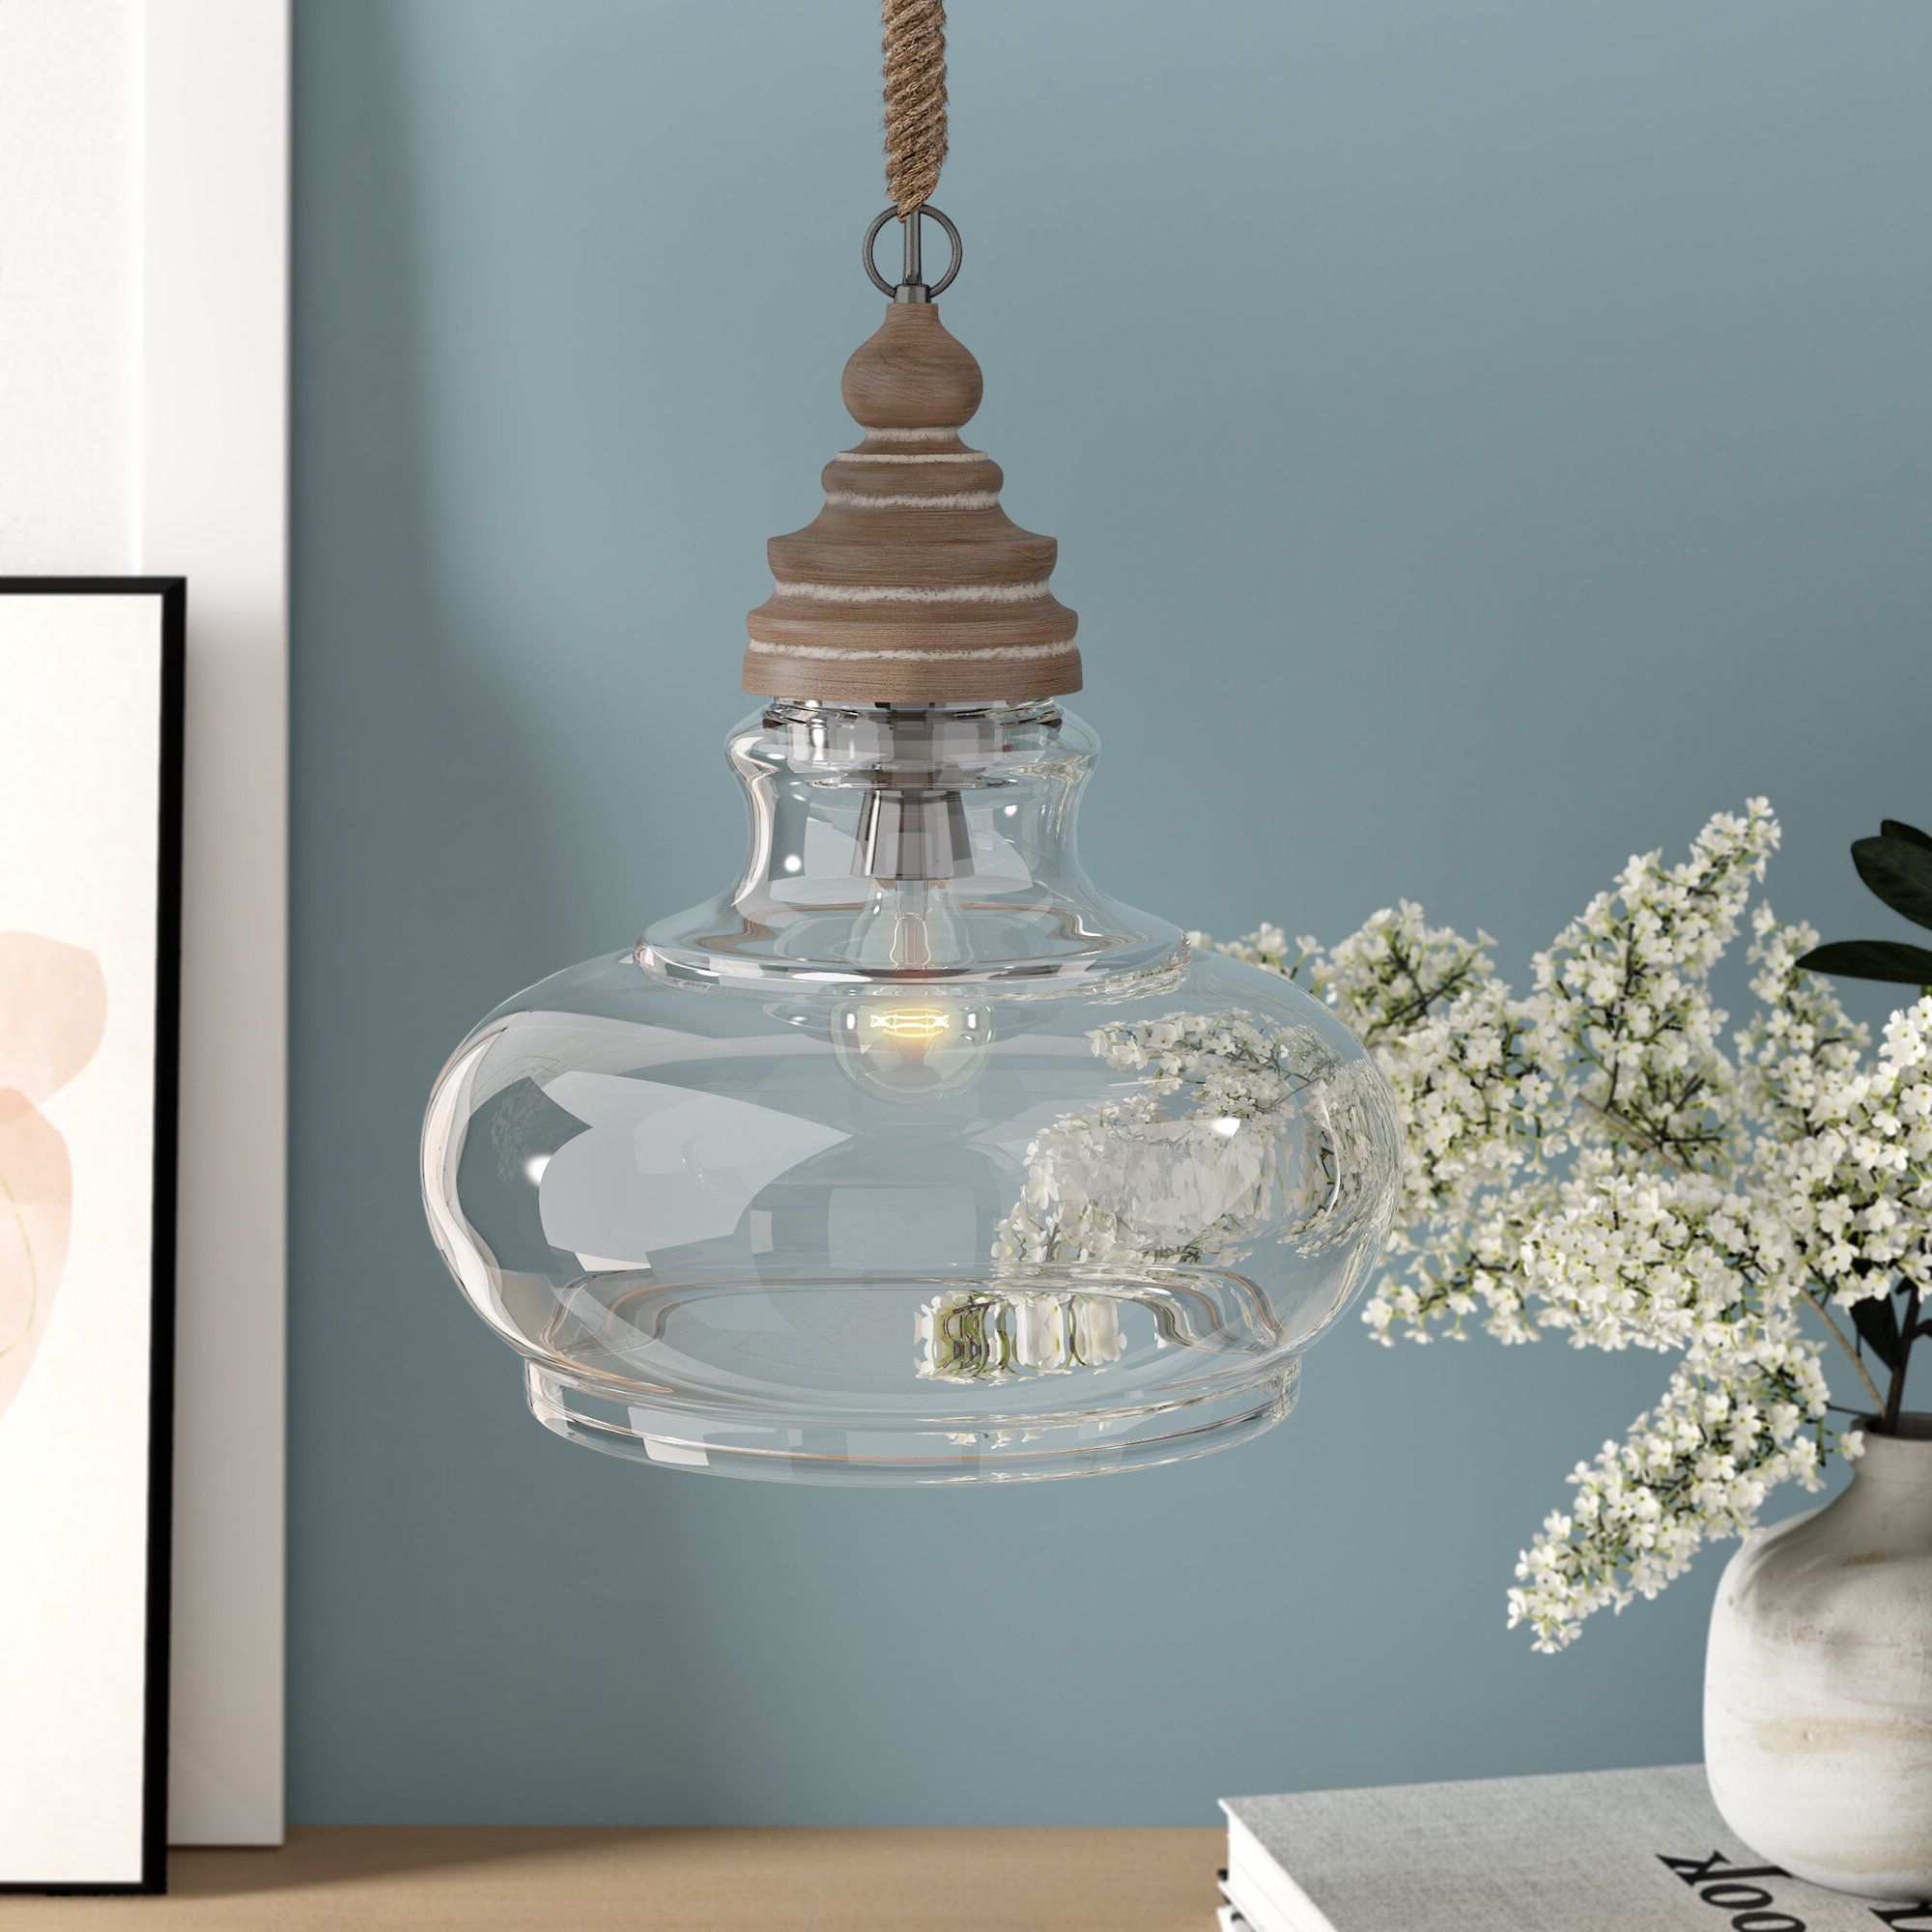 Maelle 1 Light Single Bell Pendant Within Well Known Nadine 1 Light Single Schoolhouse Pendants (View 7 of 25)